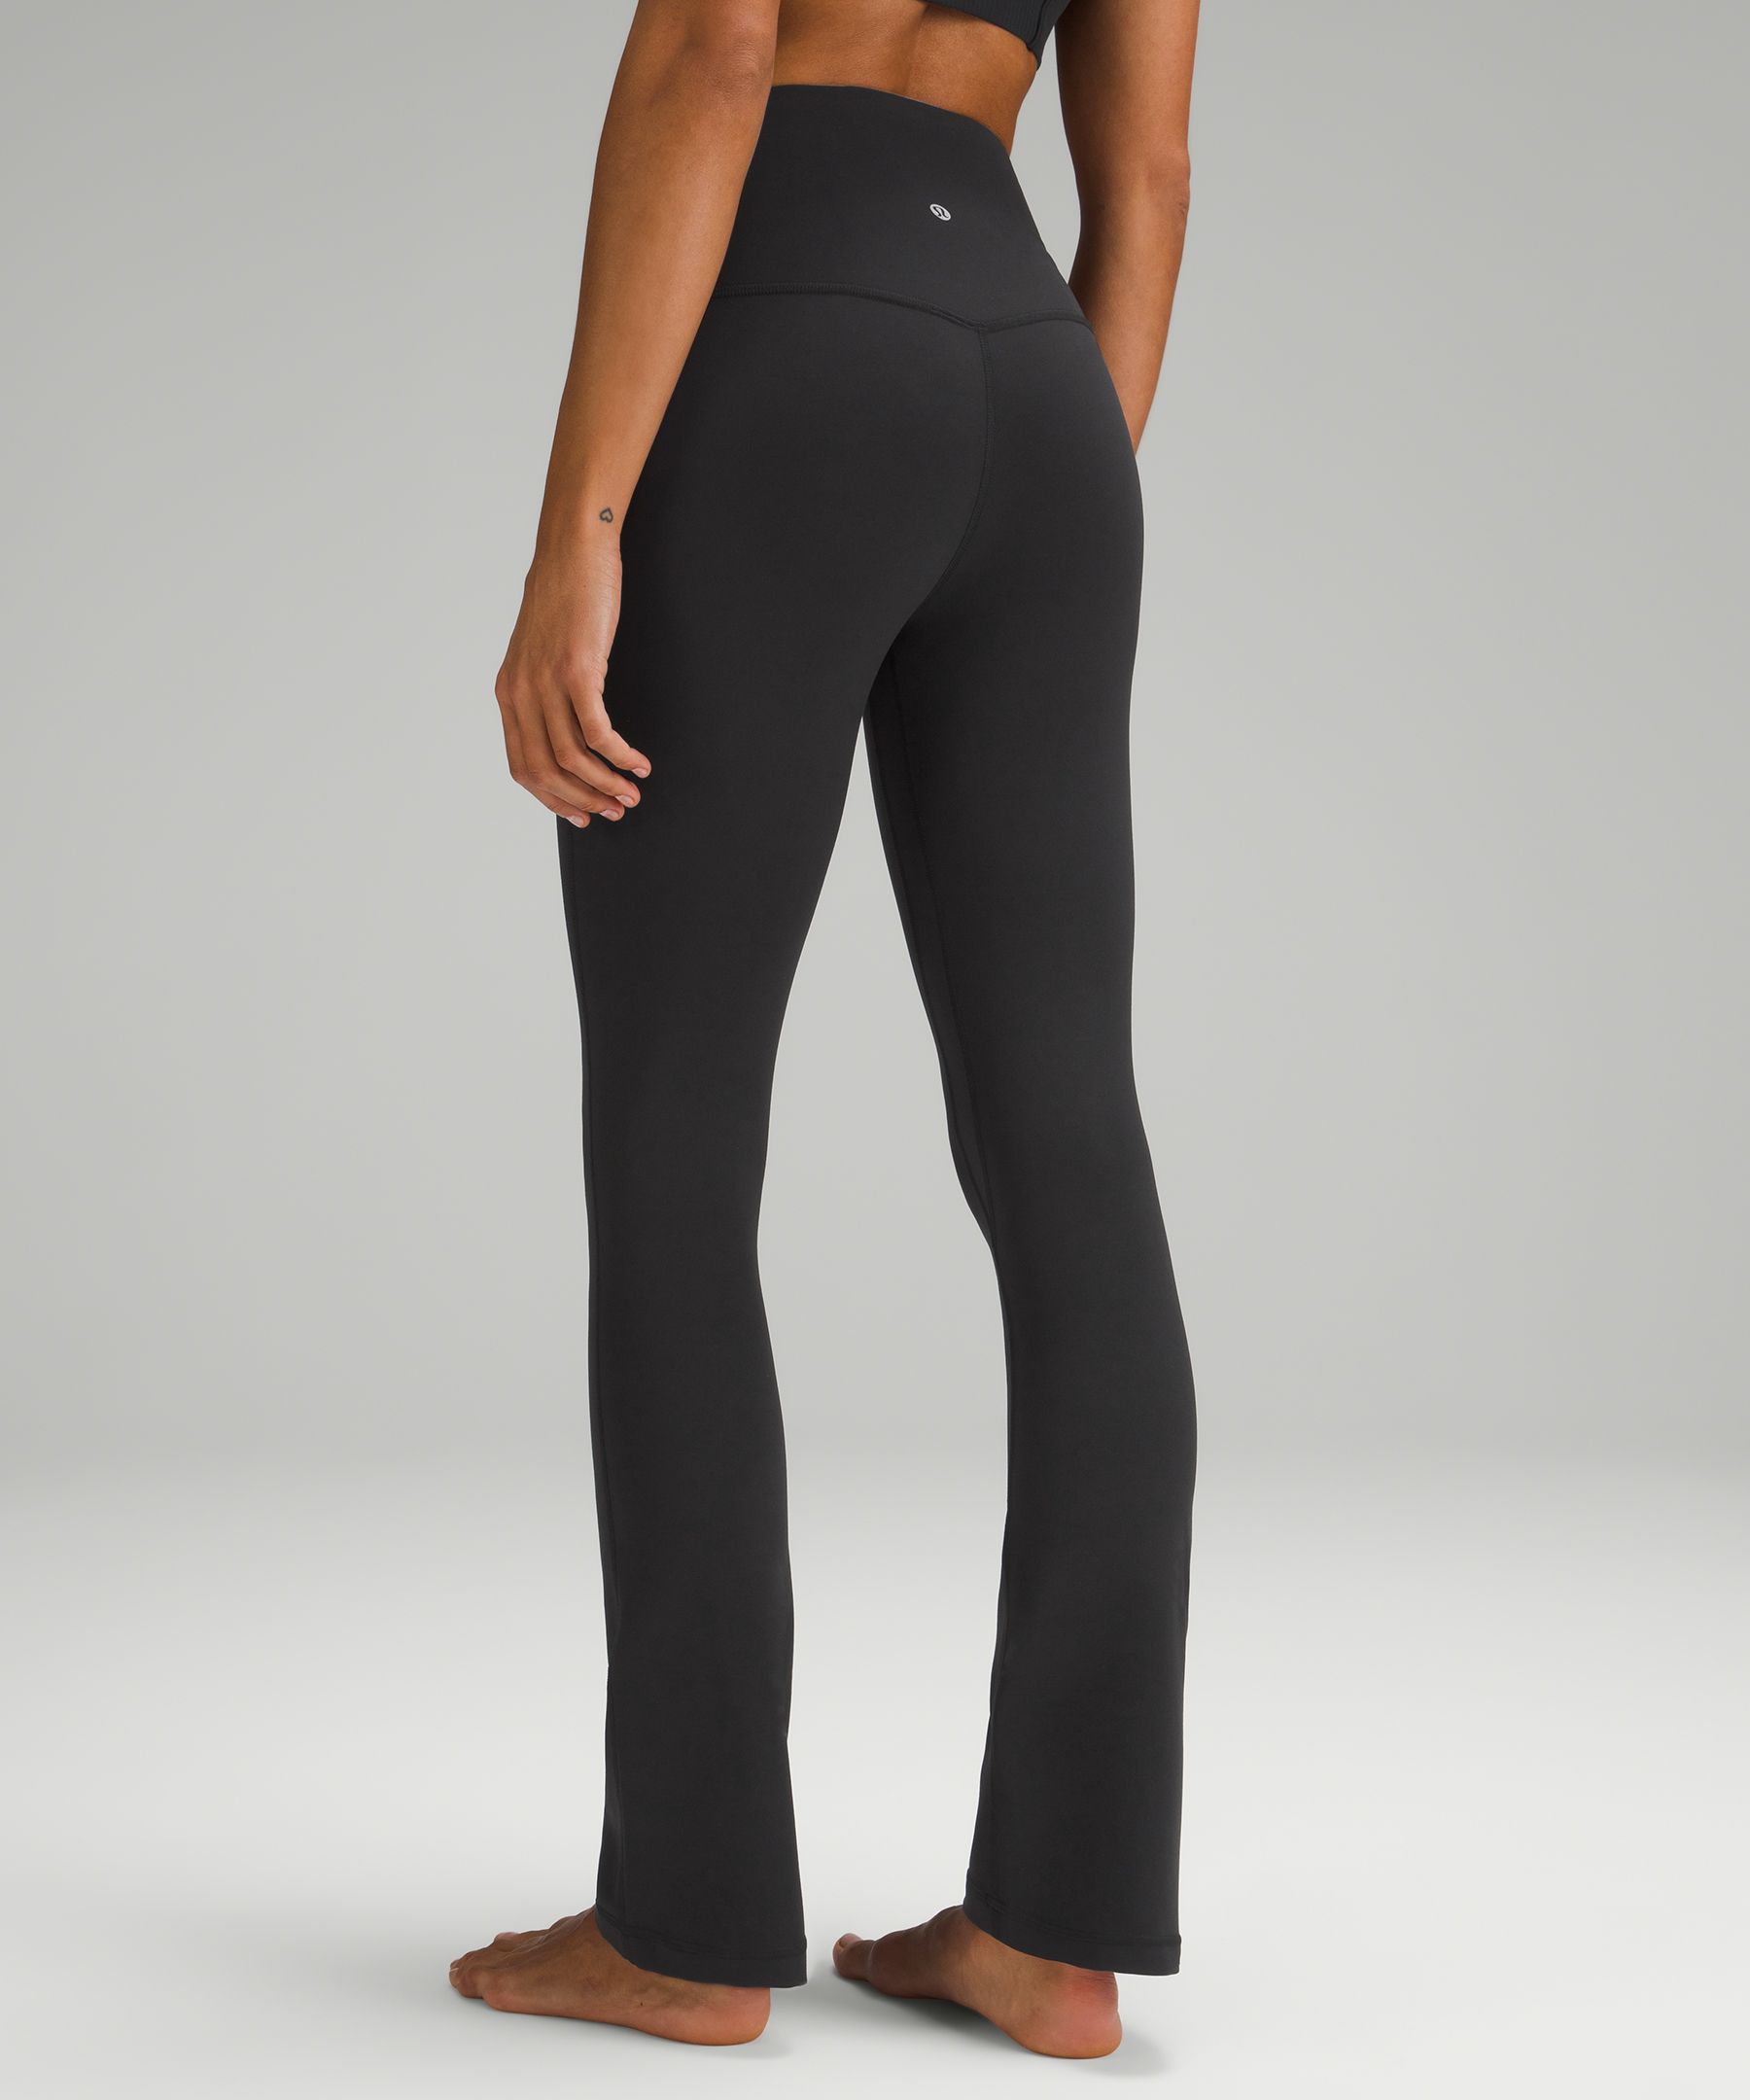 Lululemon Align High-Waisted Yoga Pants with 28 Inch Inseam